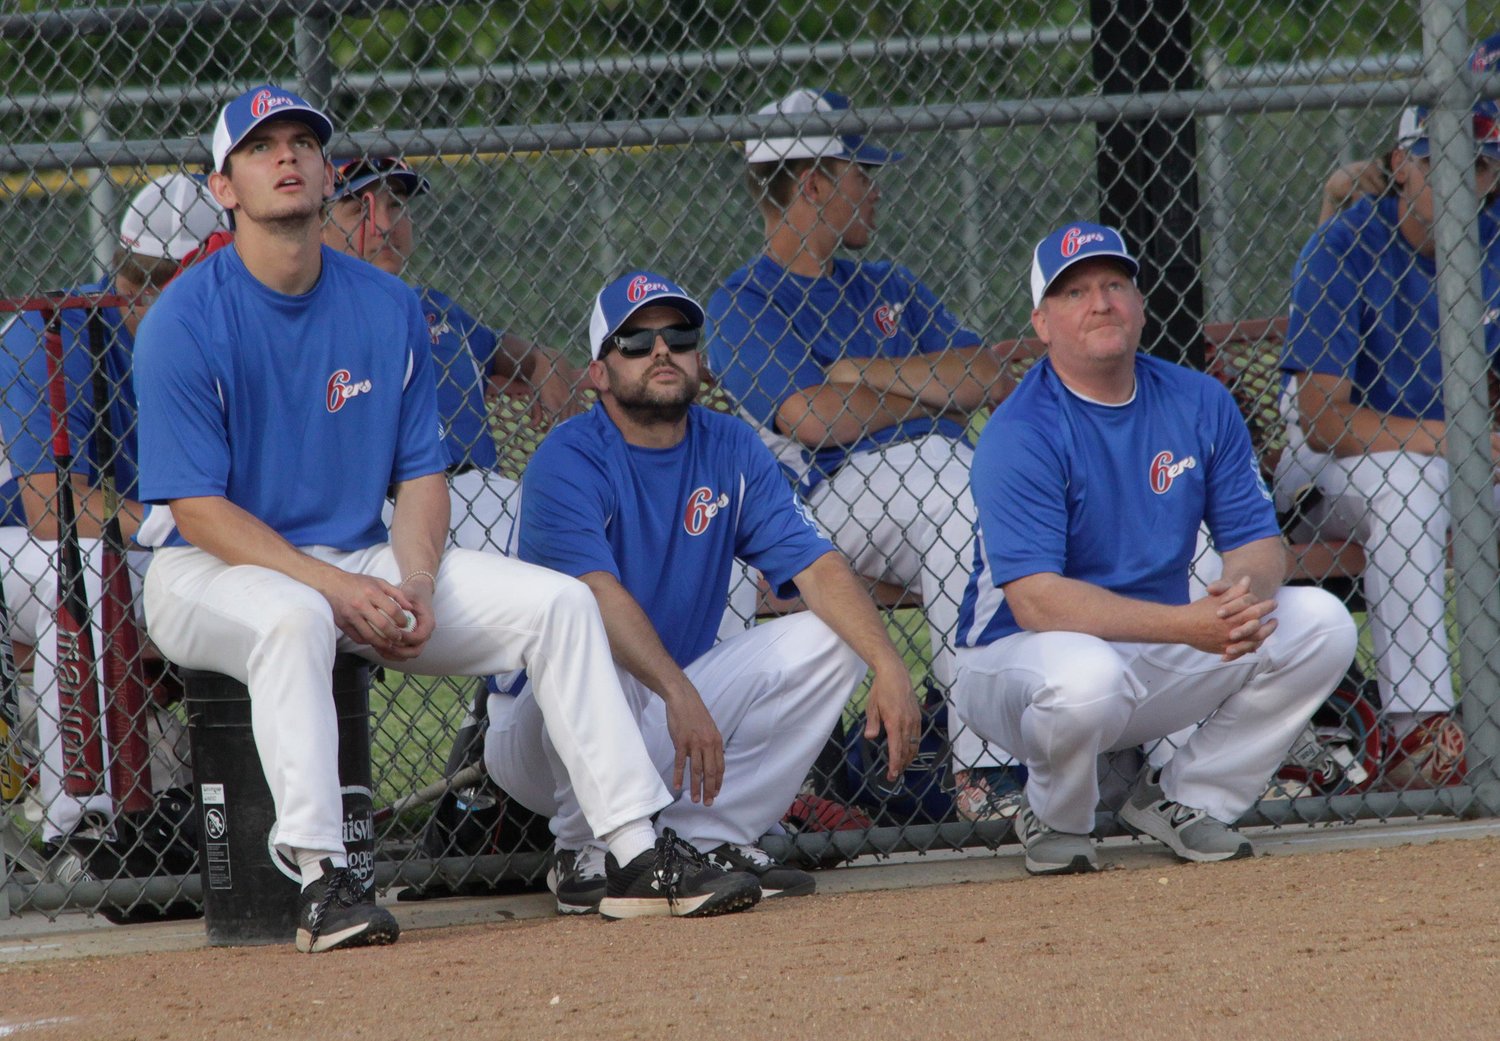 A fly ball catches the attention of NEMO Post 6 Sixers coaches Jackson Truesdell, Drew Hunt and Kevin Pipes as they sit outside of the team's dugout during a home baseball game played earlier this 2021 season.